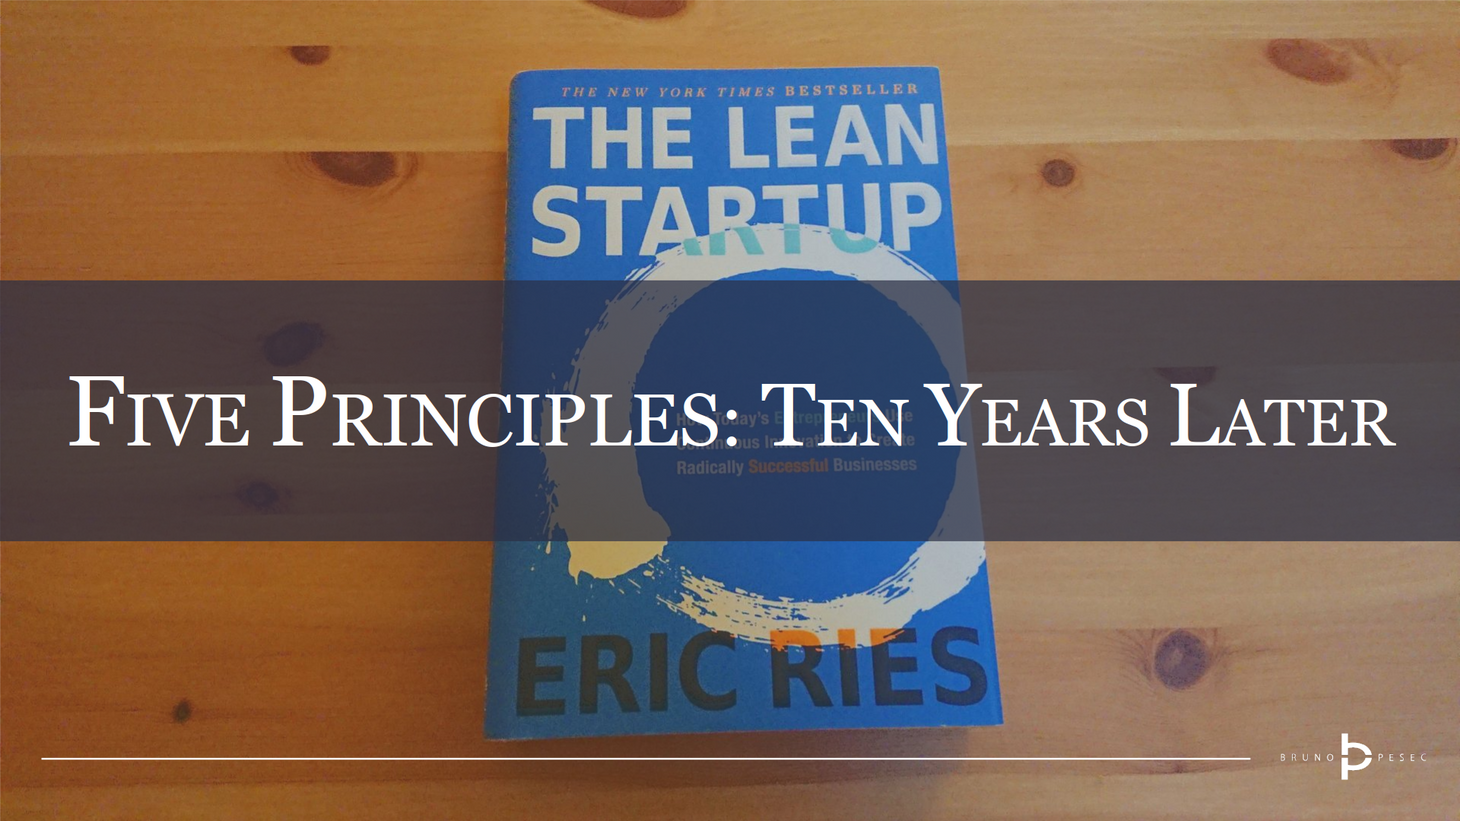 Five principles of the Lean Startup: 10 years later